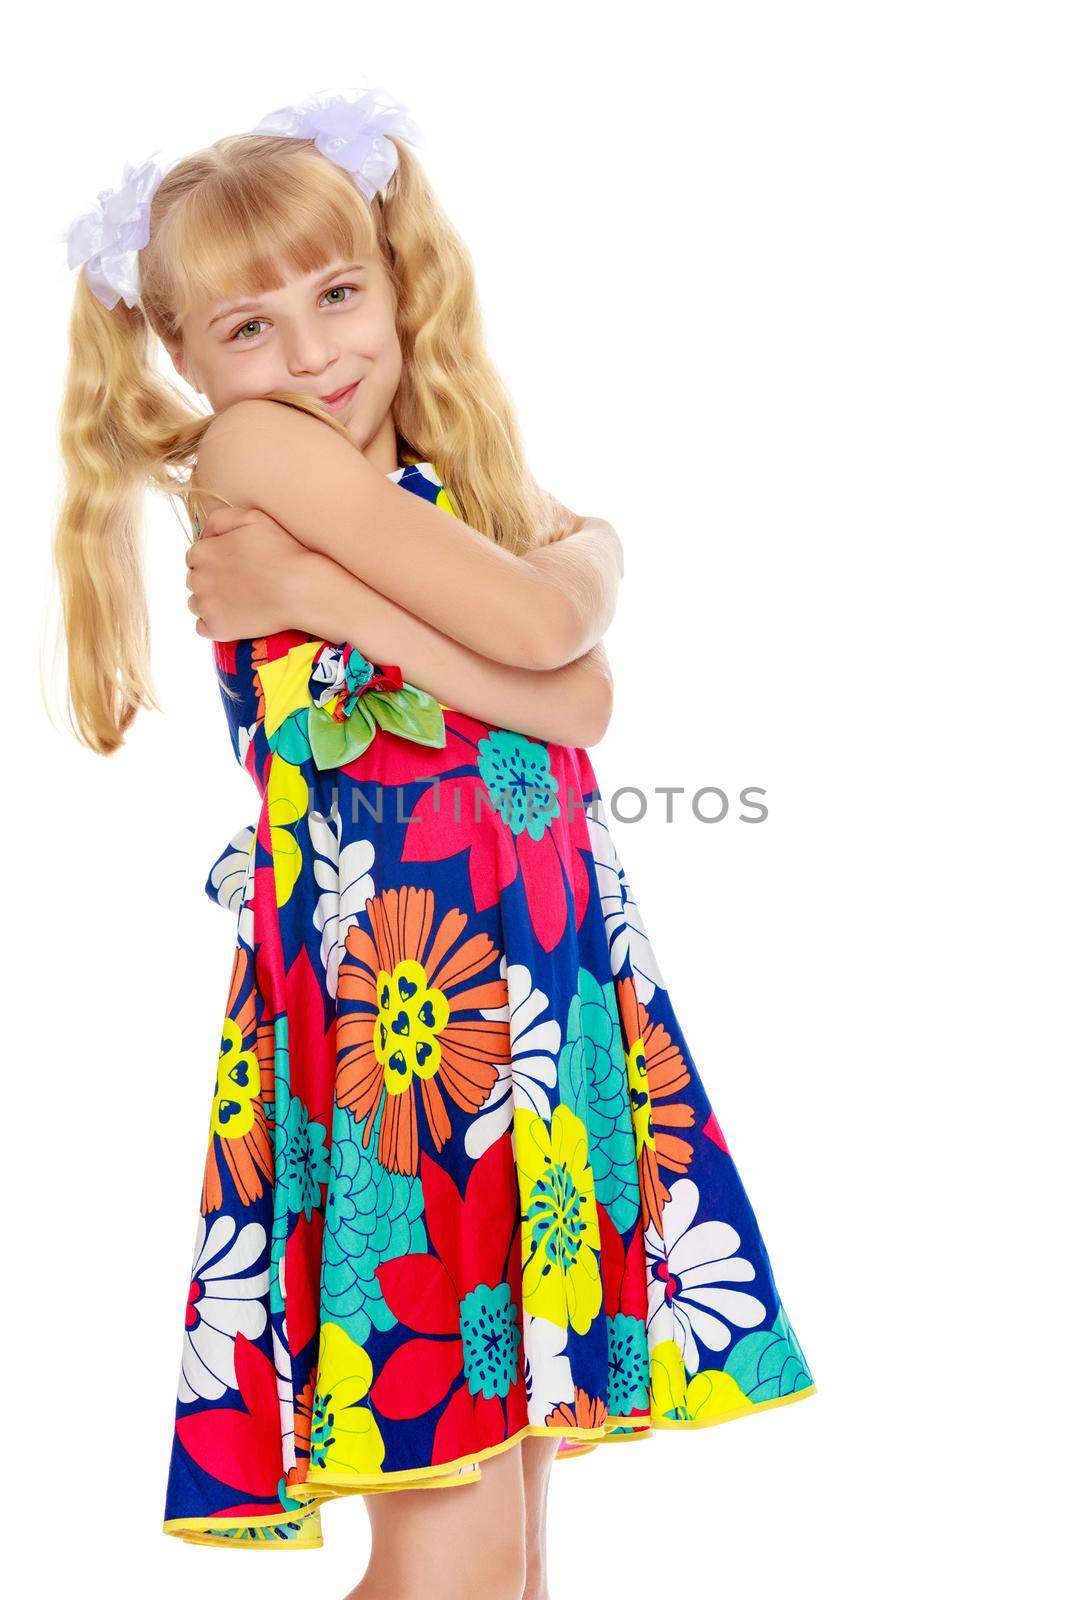 Sweet, adorable little girl with long blonde ponytails on her head tied with white bows. Close-up-Isolated on white background